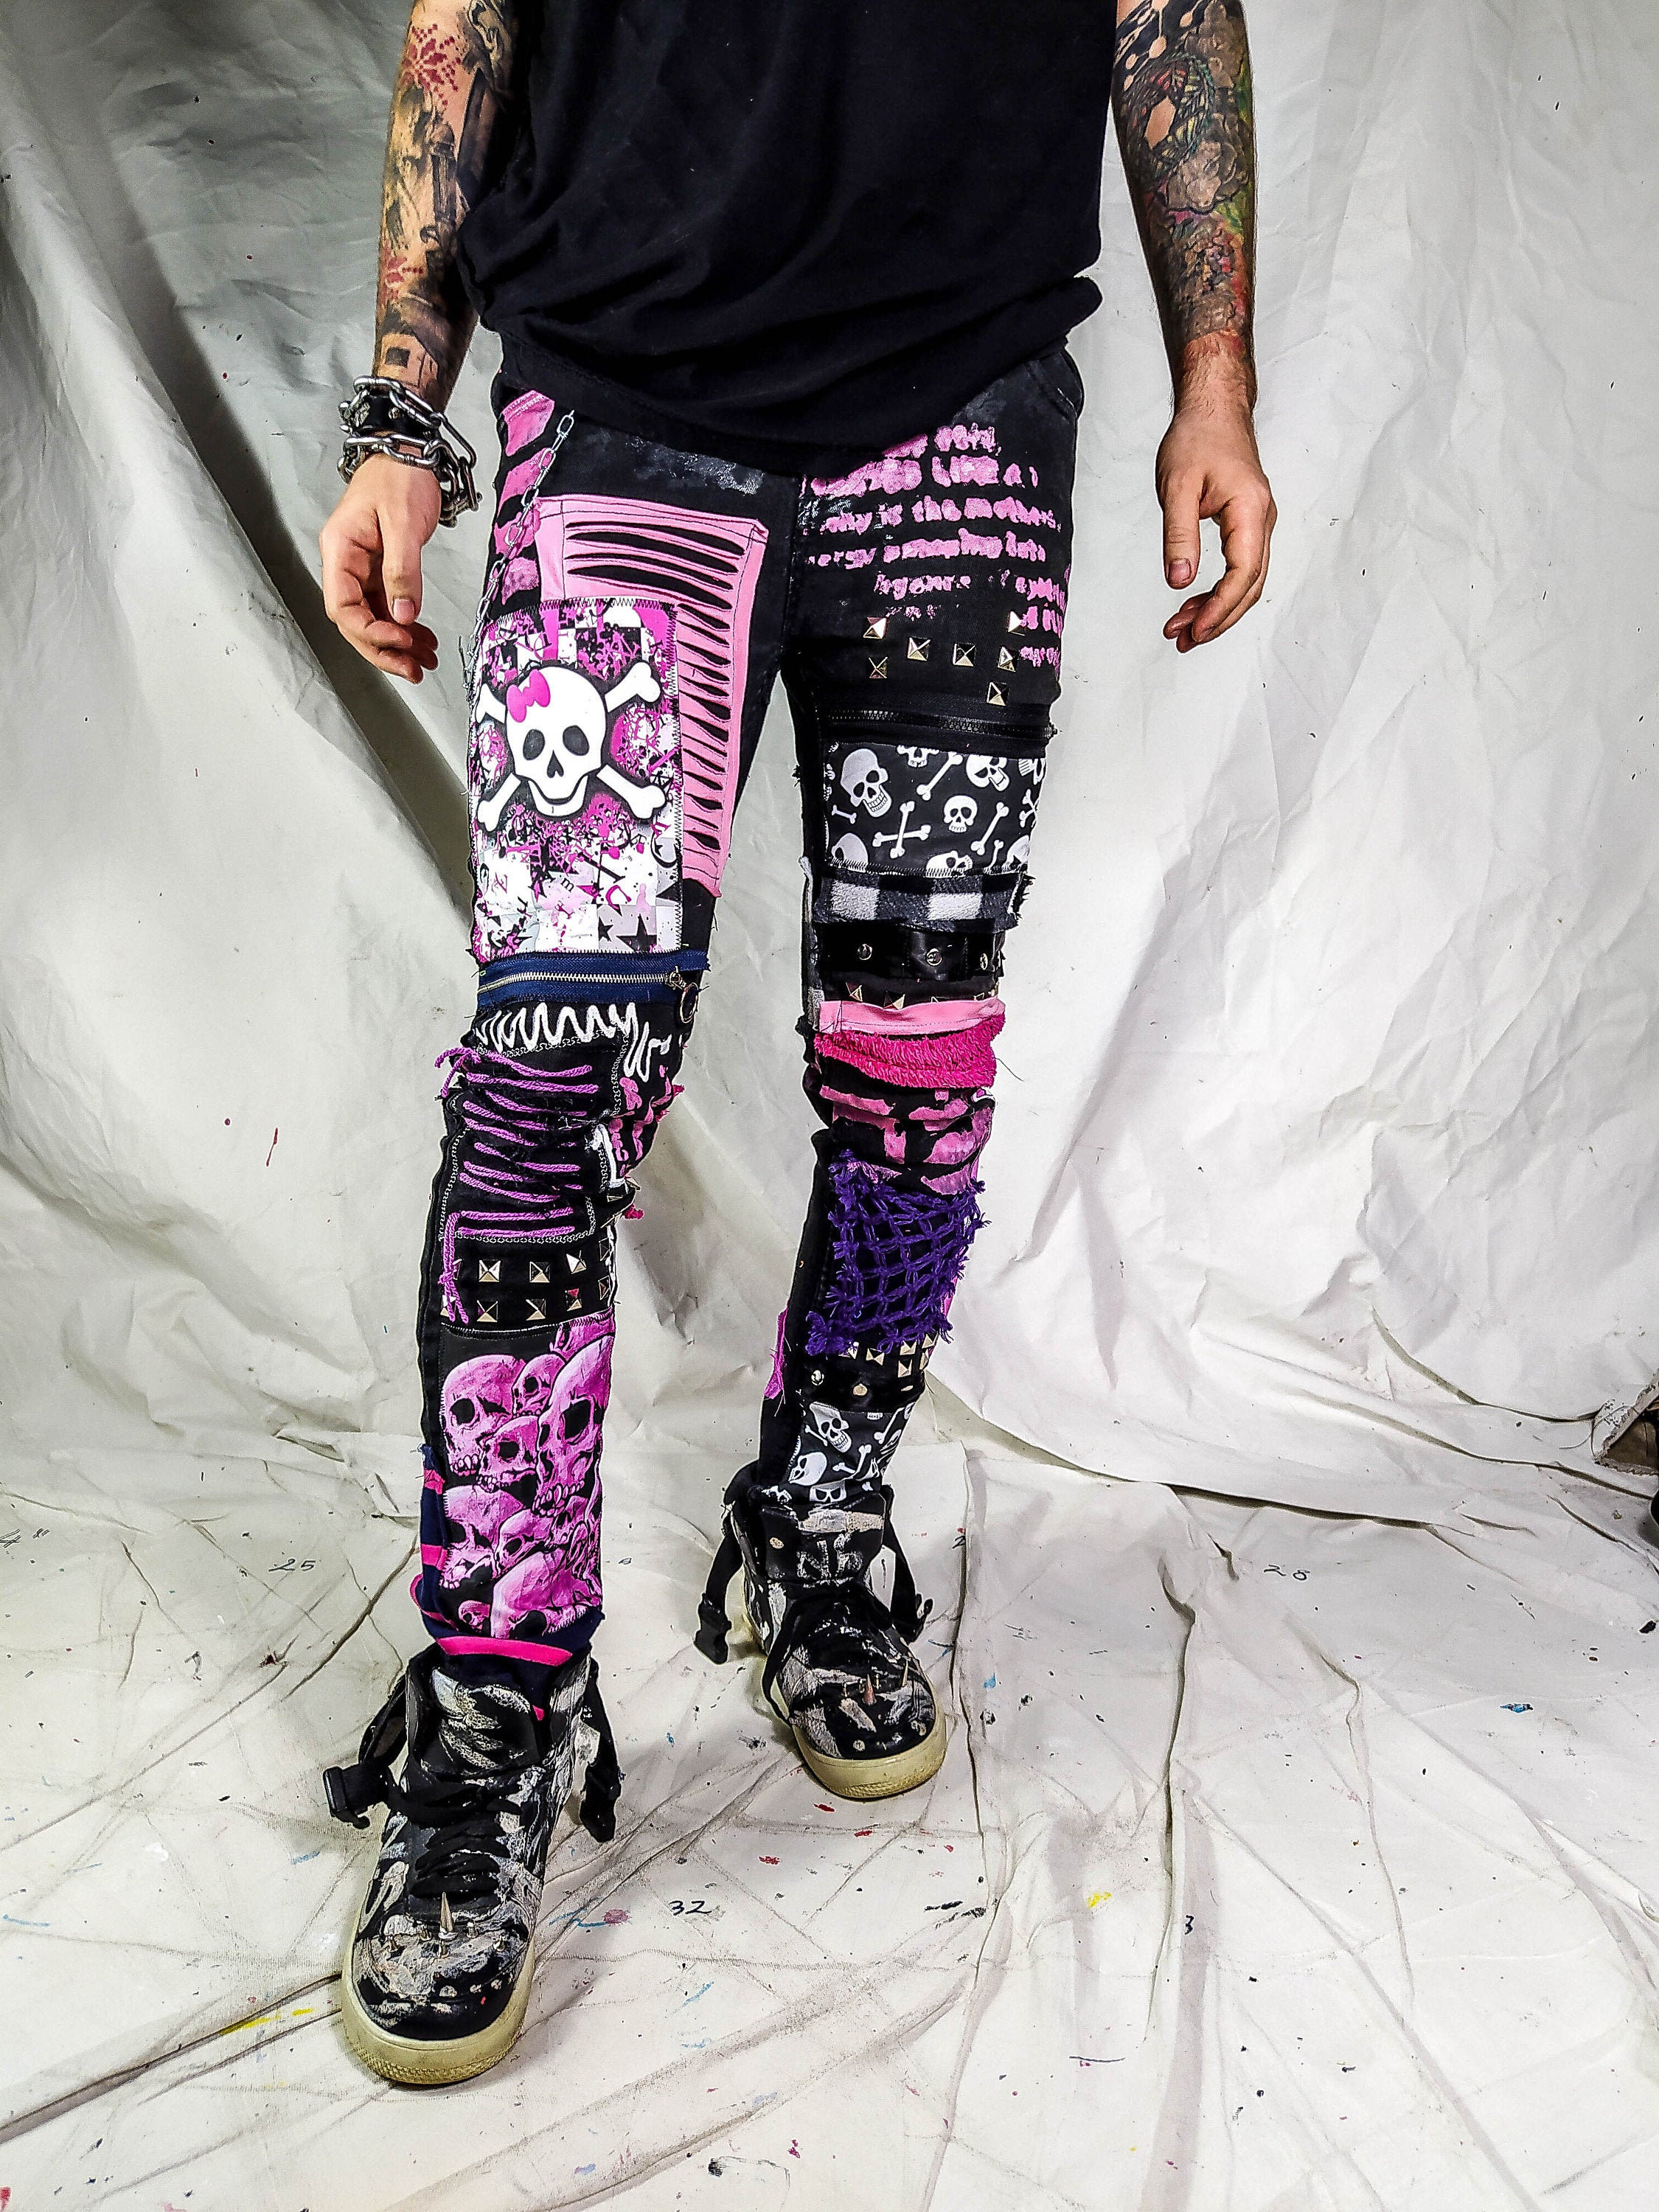 Is That The New Grunge Punk Skull Graphic Sweatpants ??